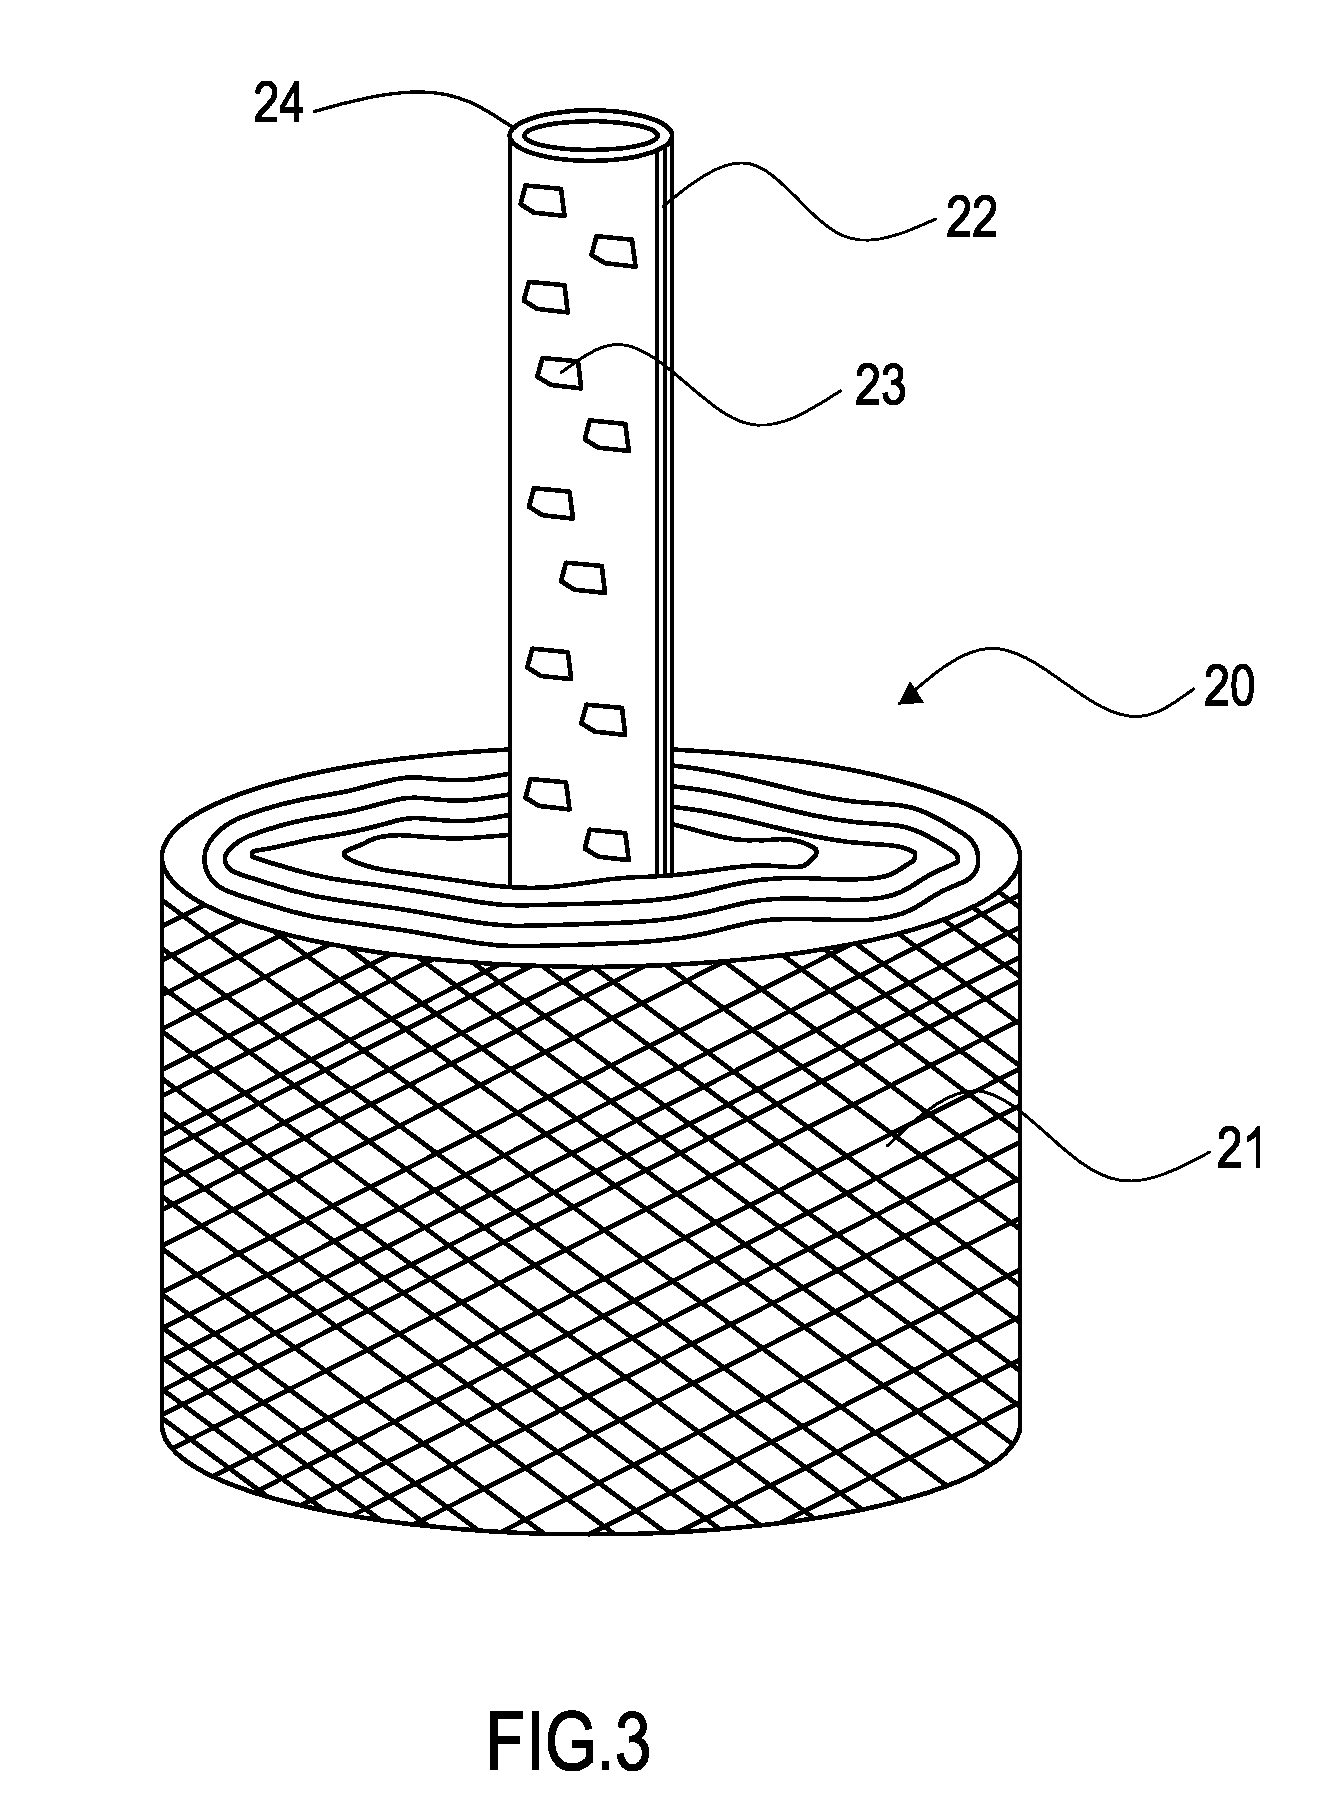 Substrates Comprising Anti-Microbial Compositions and Methods of Making and Using the Same